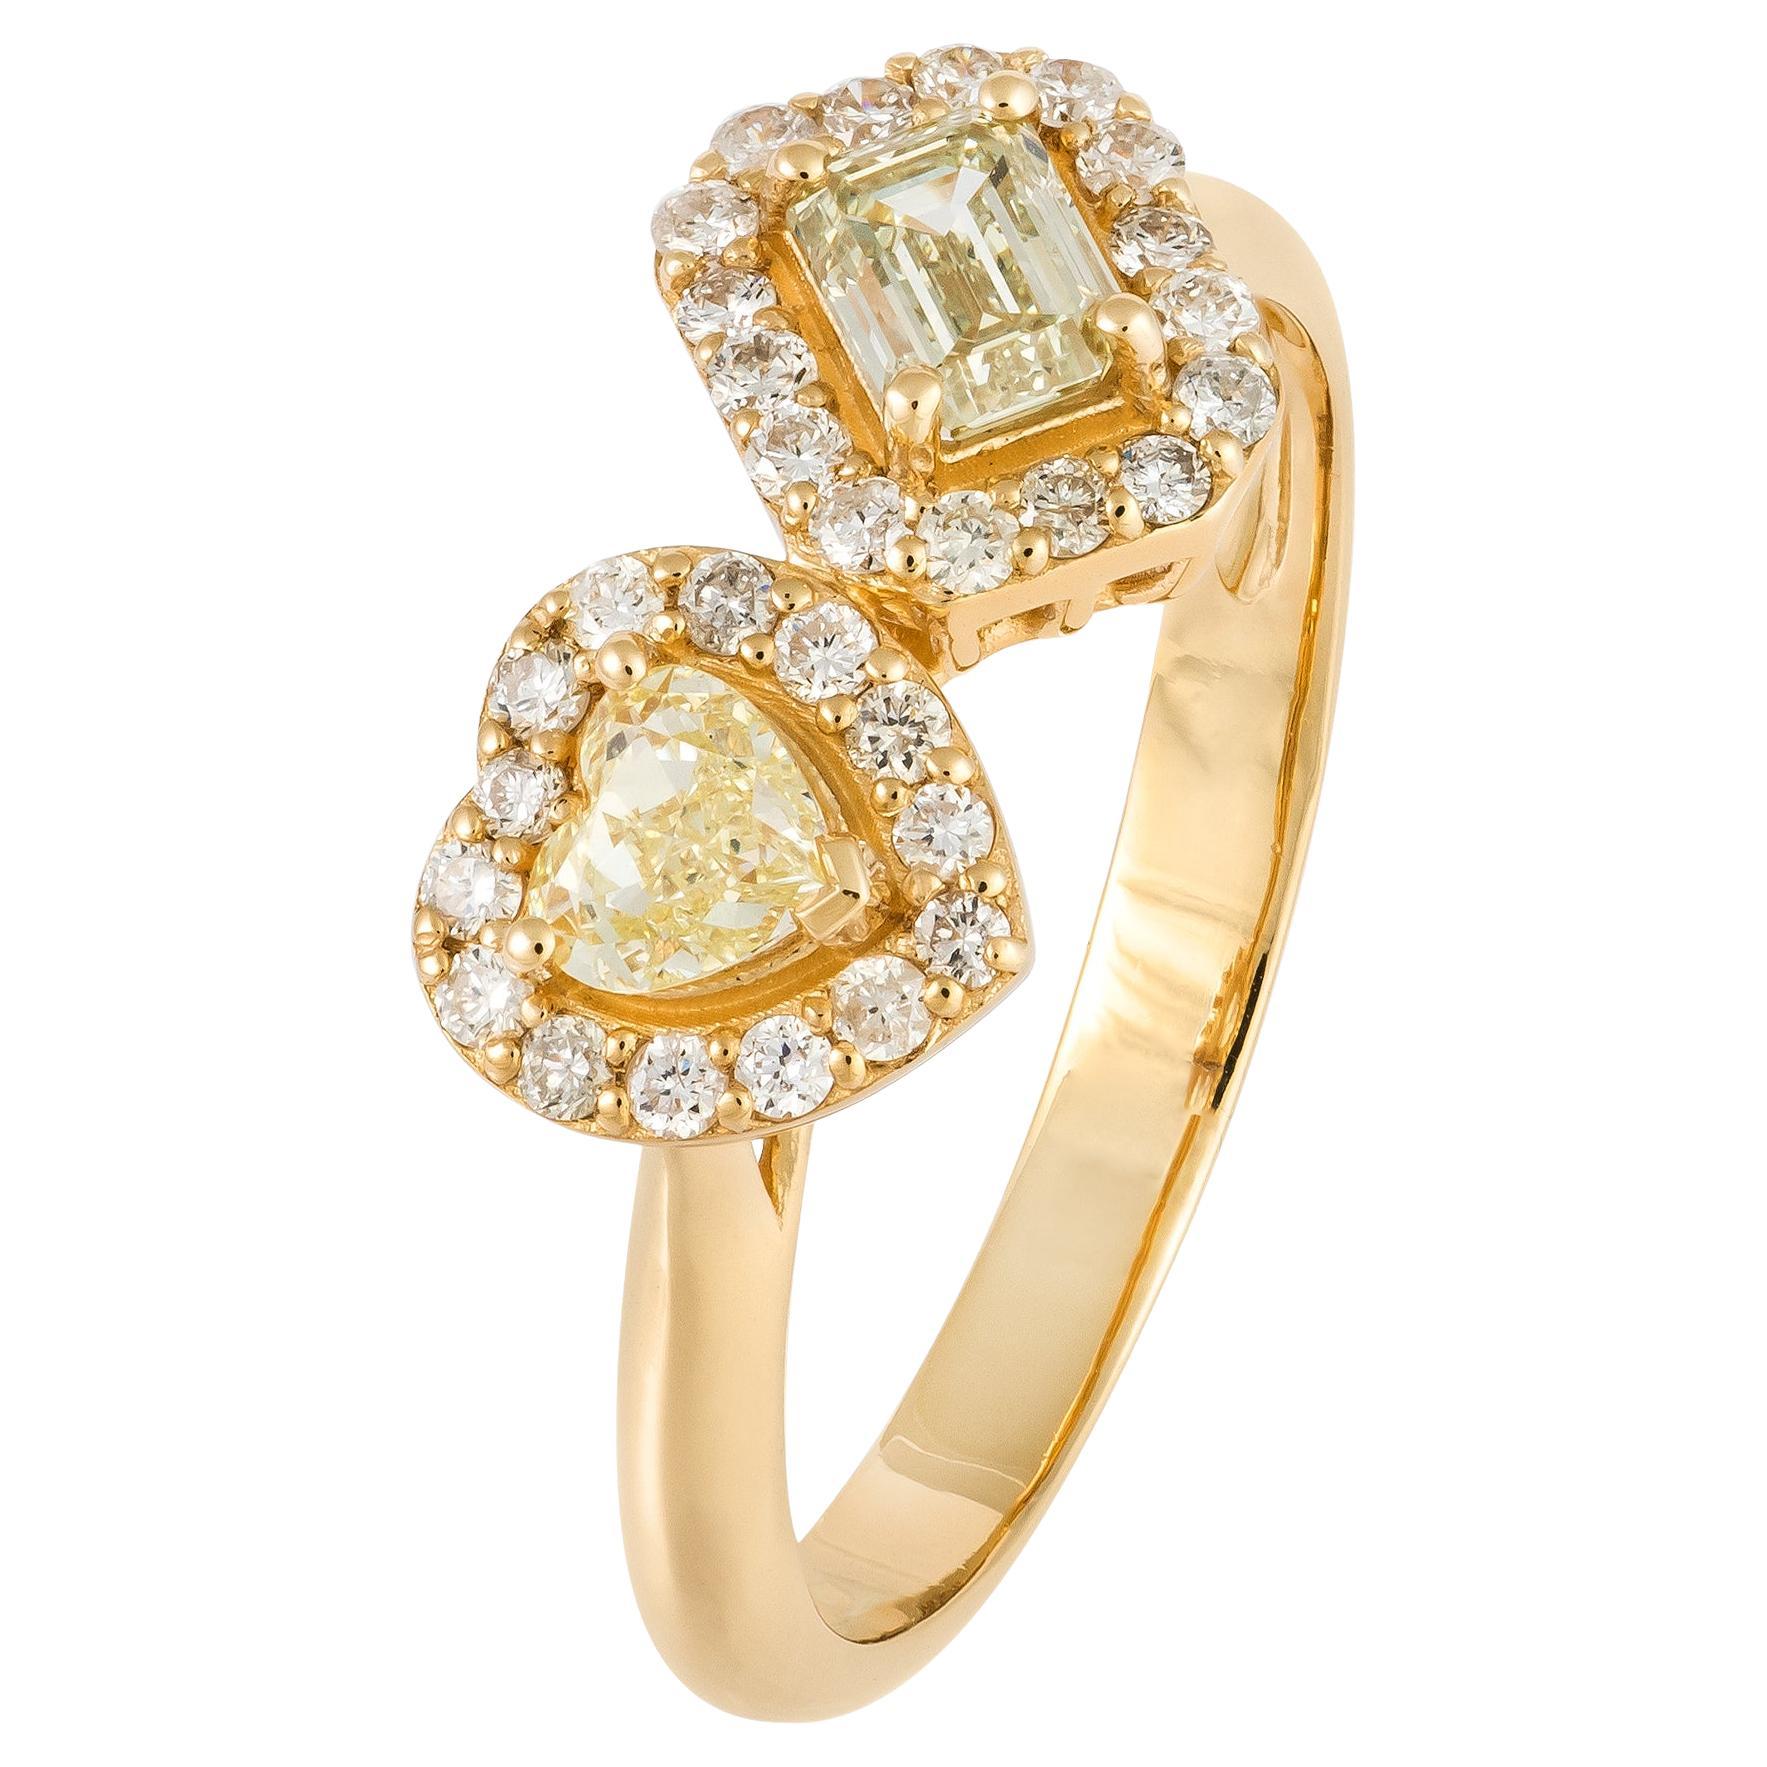 For Sale:  Impressive Yellow 18K Gold White Yellow Diamond Ring For Her